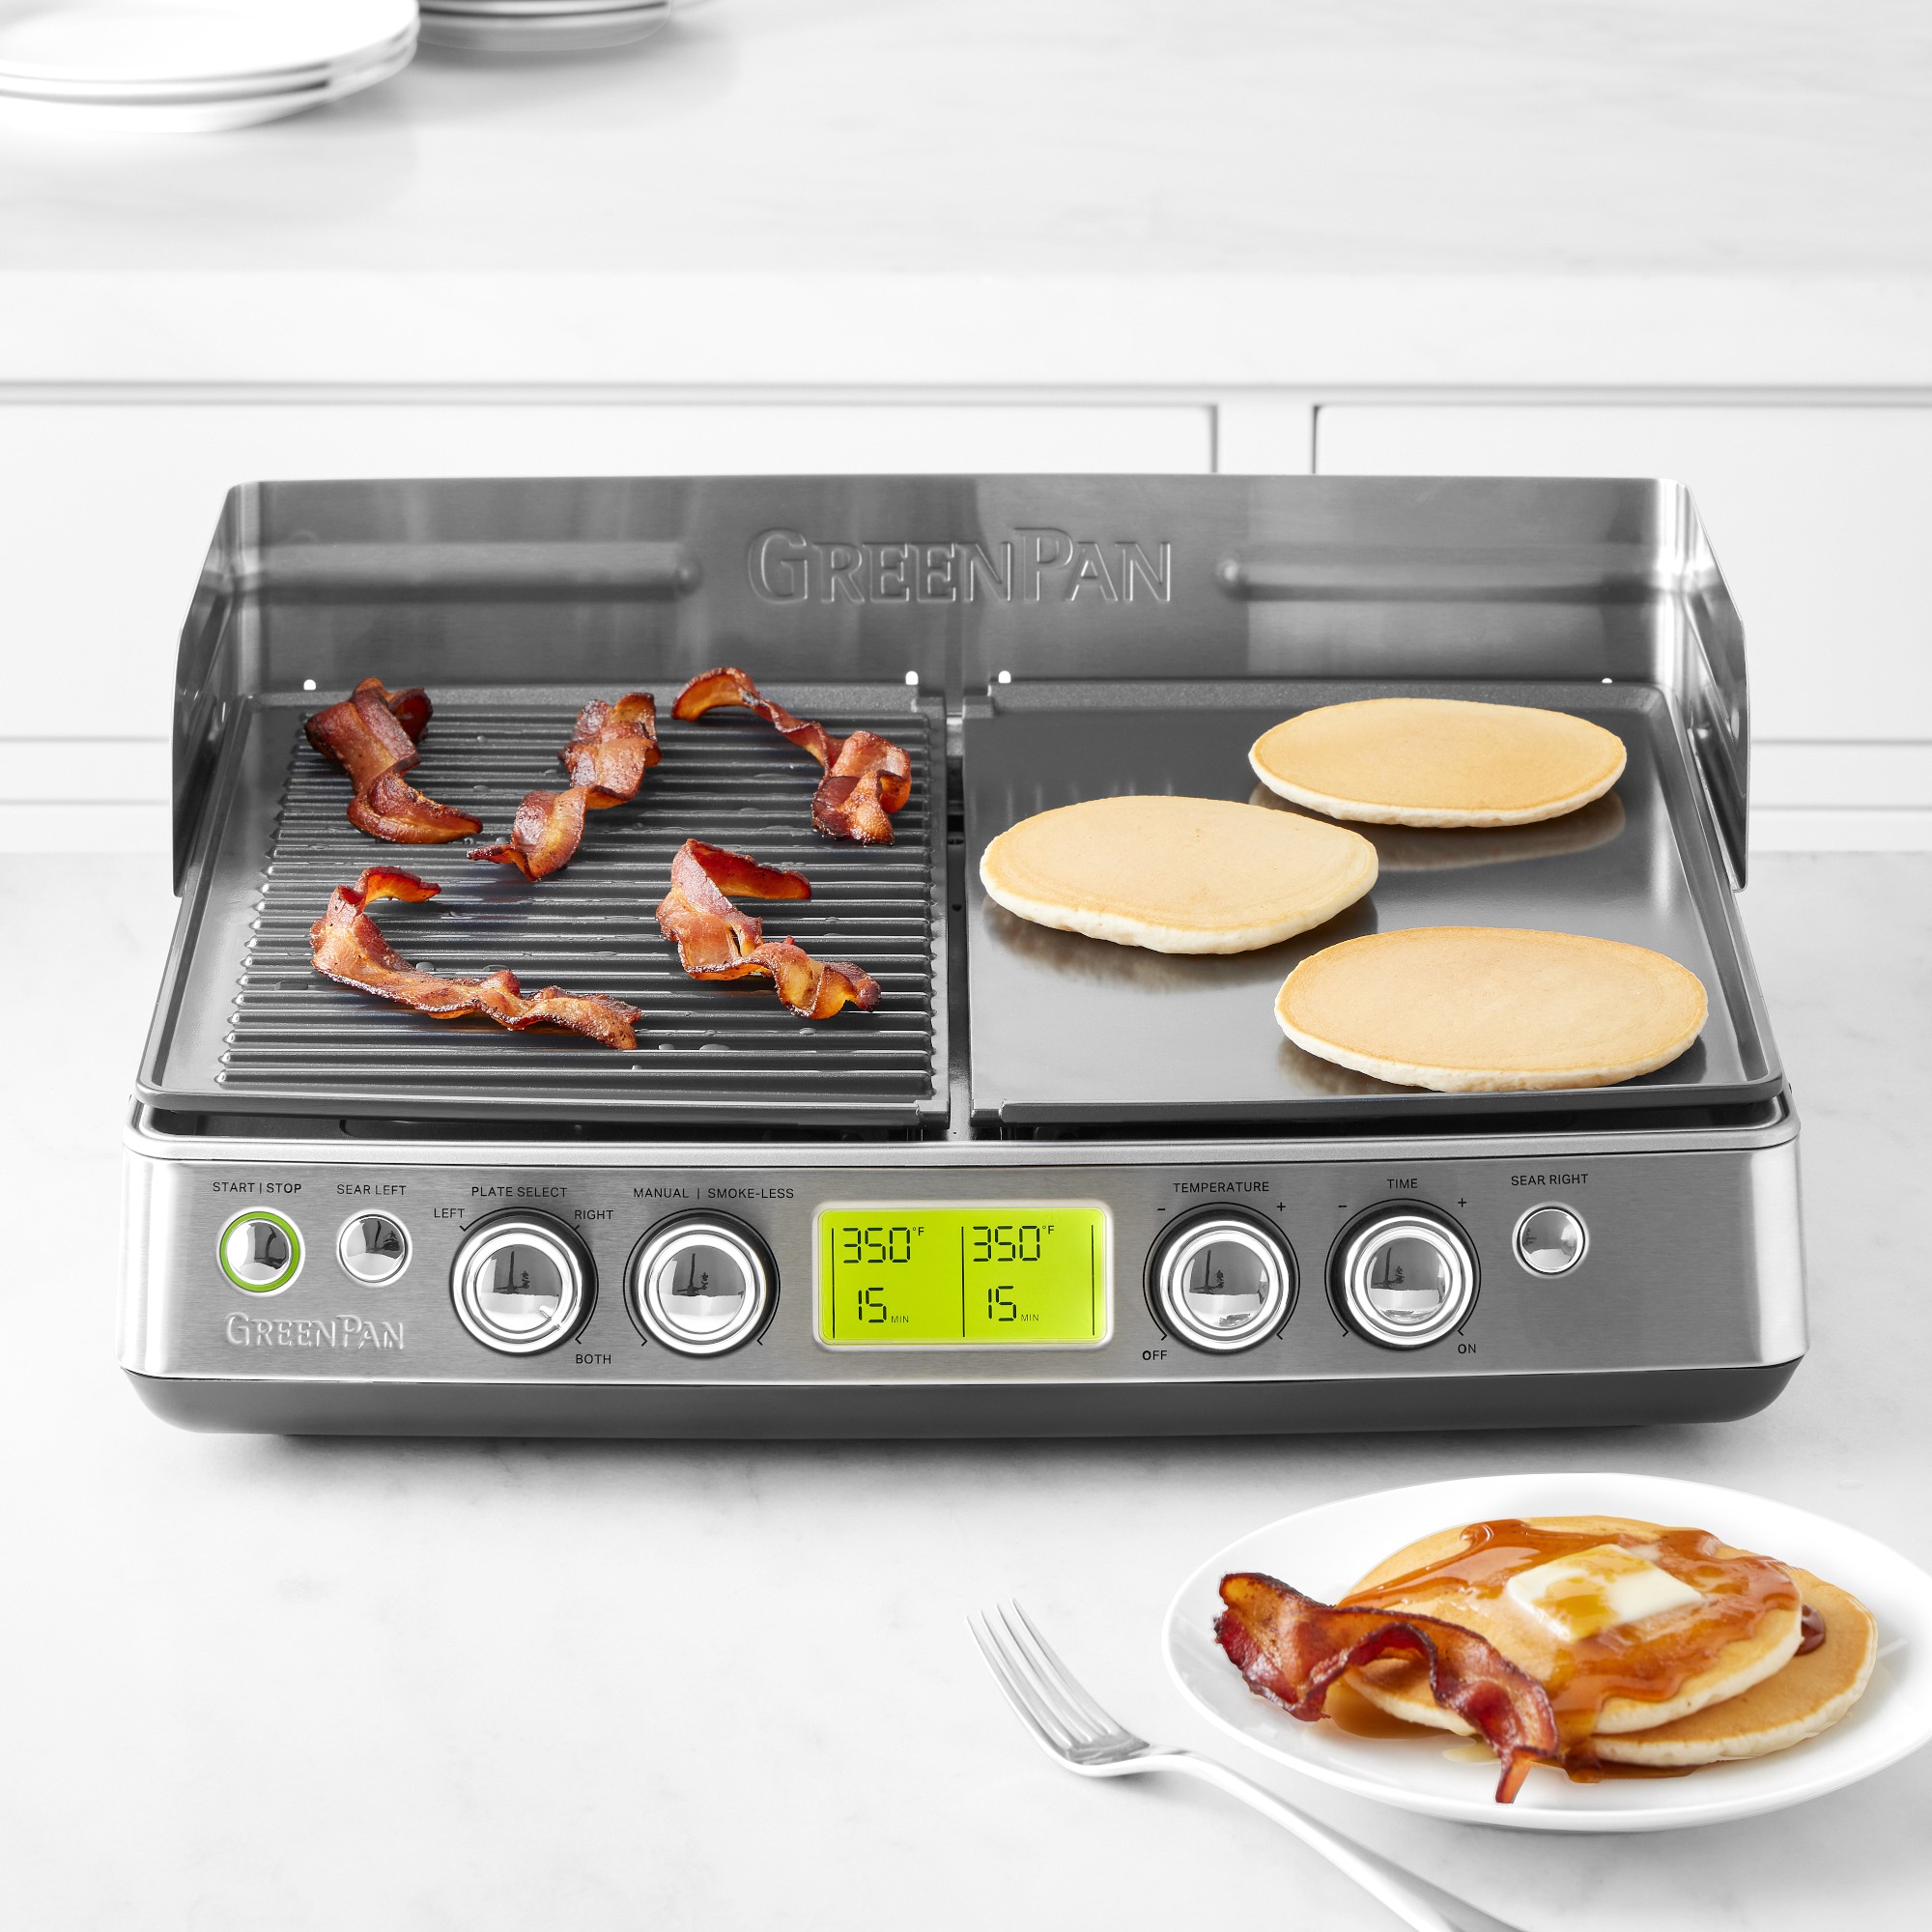 GreenPan Premiere Smoke-Less Grill & Griddle with Ceramic Nonstick Coating in Stainless Steel